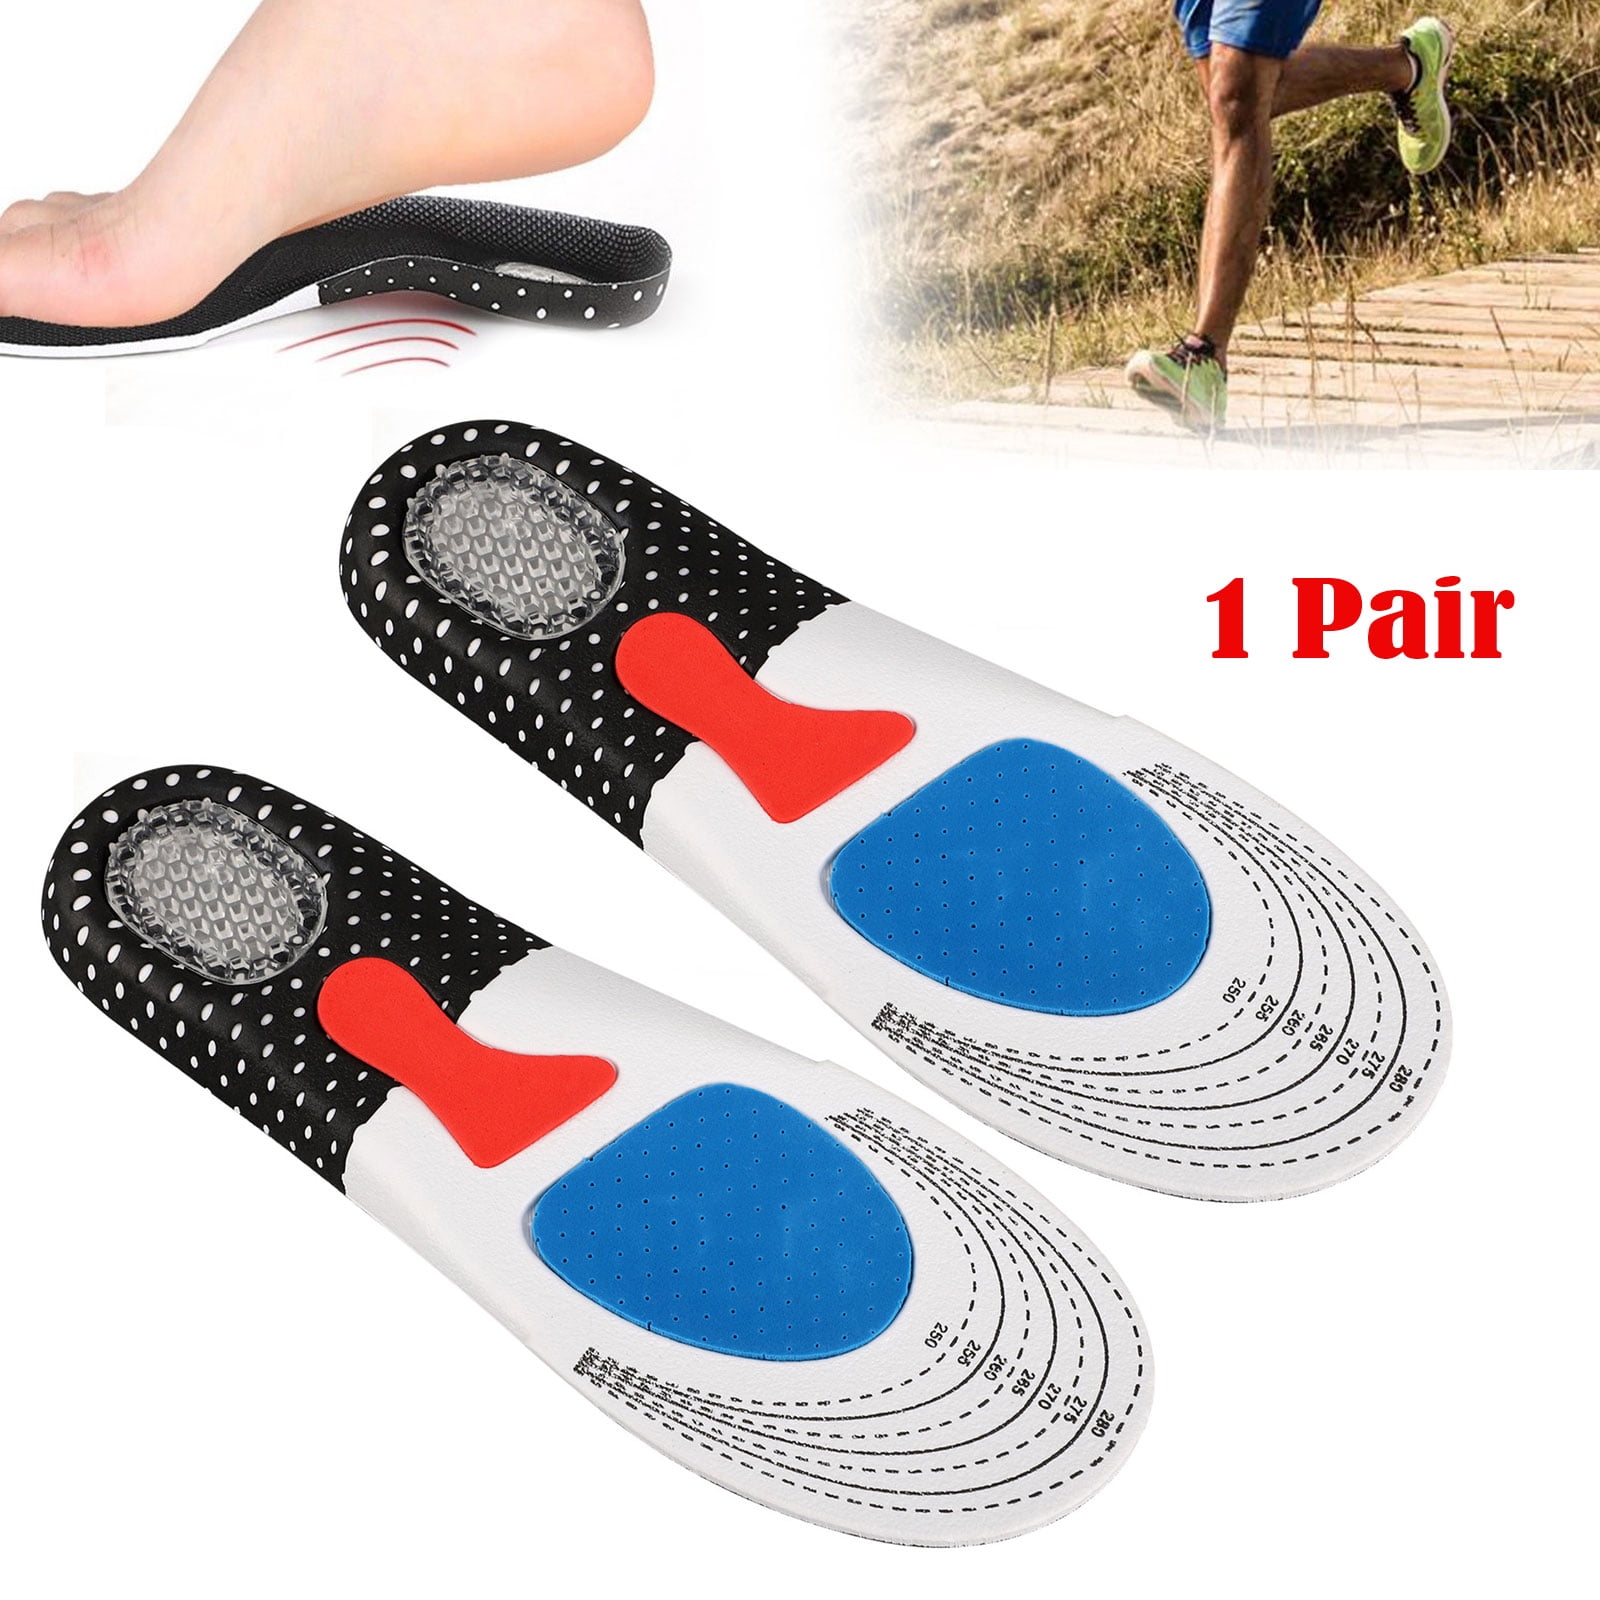 1 Pair Sport Shock Absorbing Insoles Gel Sport Insole Cushion Pad for Hiking 